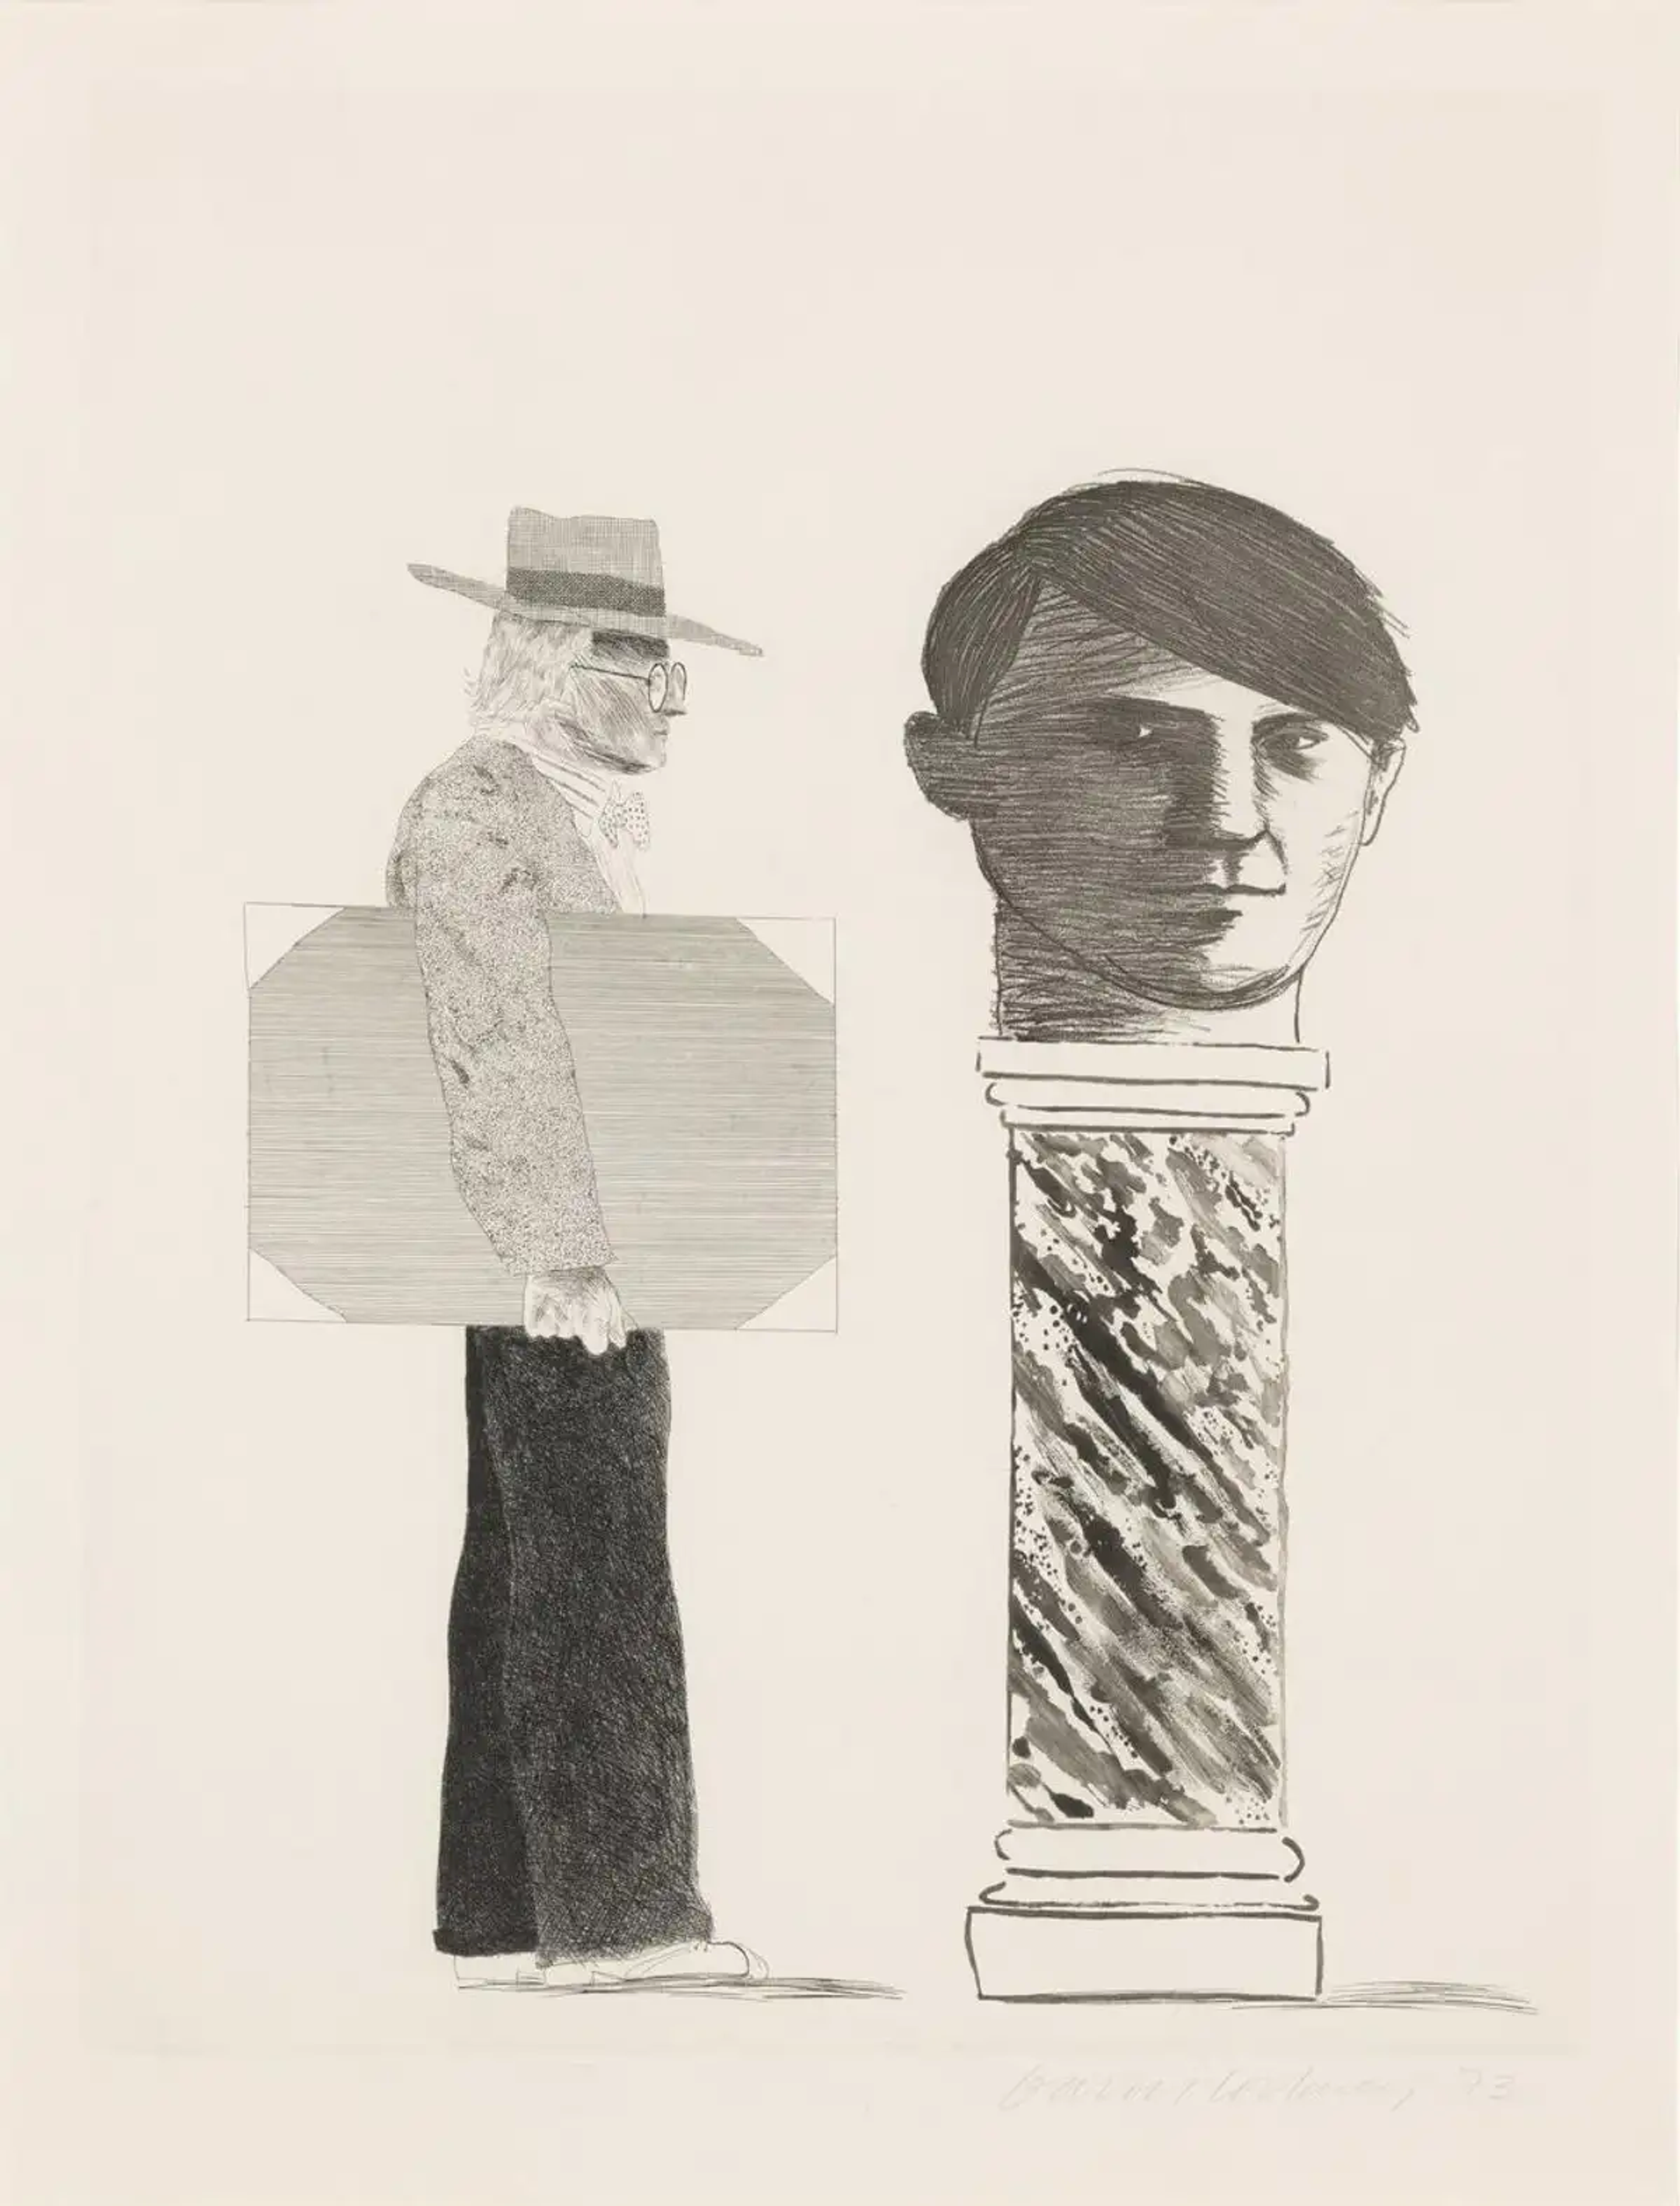 This signed print by much-loved British artist David Hockney is a tribute to Spanish artist Pablo Picasso, it depicts Hockney standing next to a bust of his idol, positioned on an ornate marble plinth.